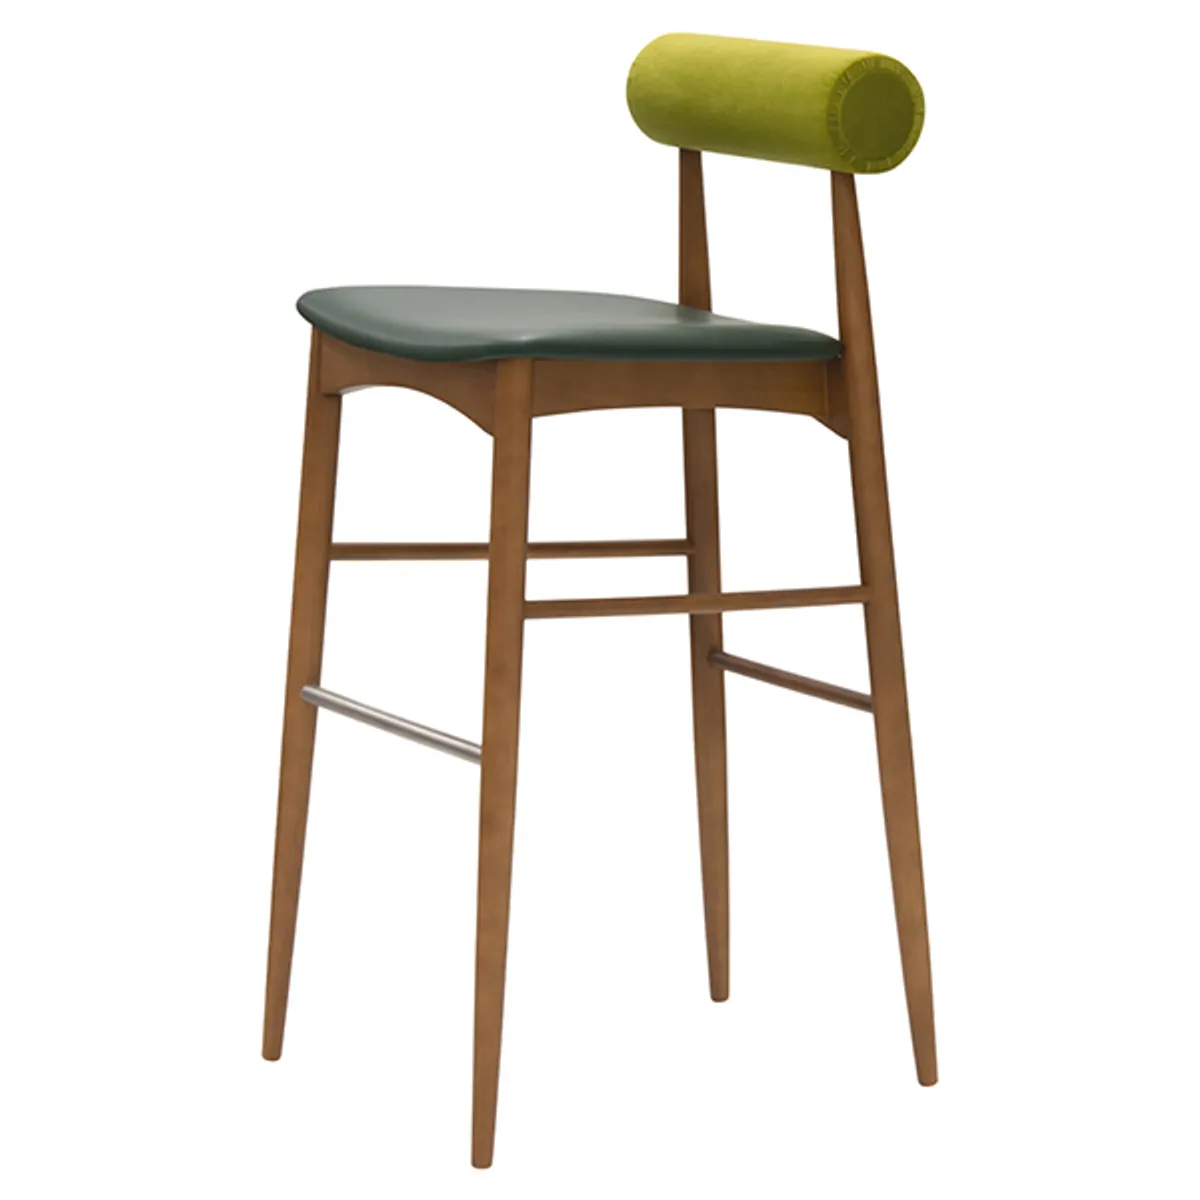 Rolla Bar Stool Quirky Furniture For Hospitality Inside Out Contracts 4